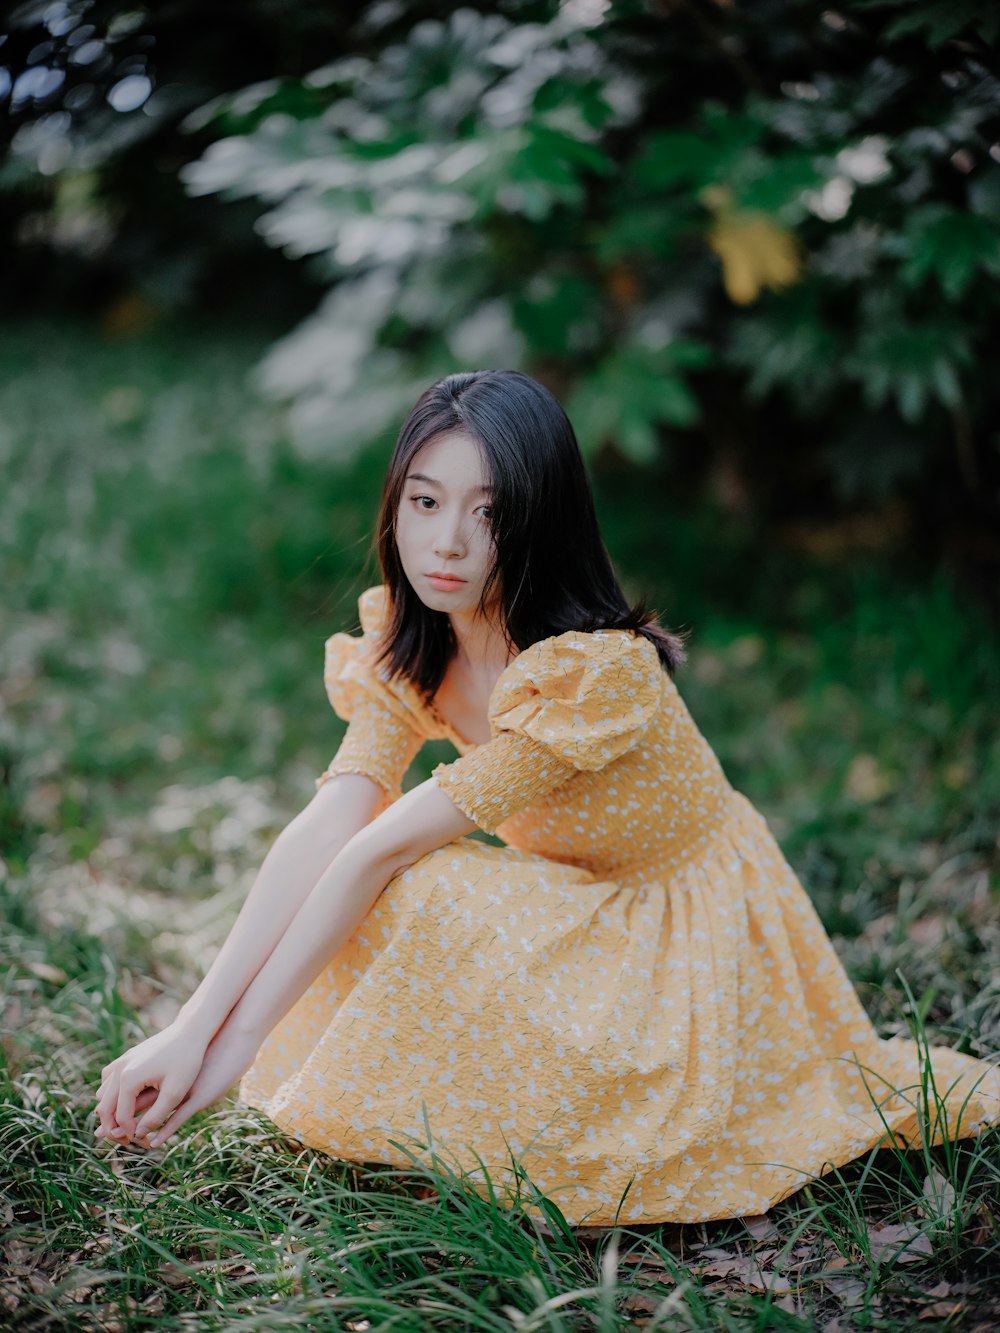 a woman in a yellow dress sitting in the grass